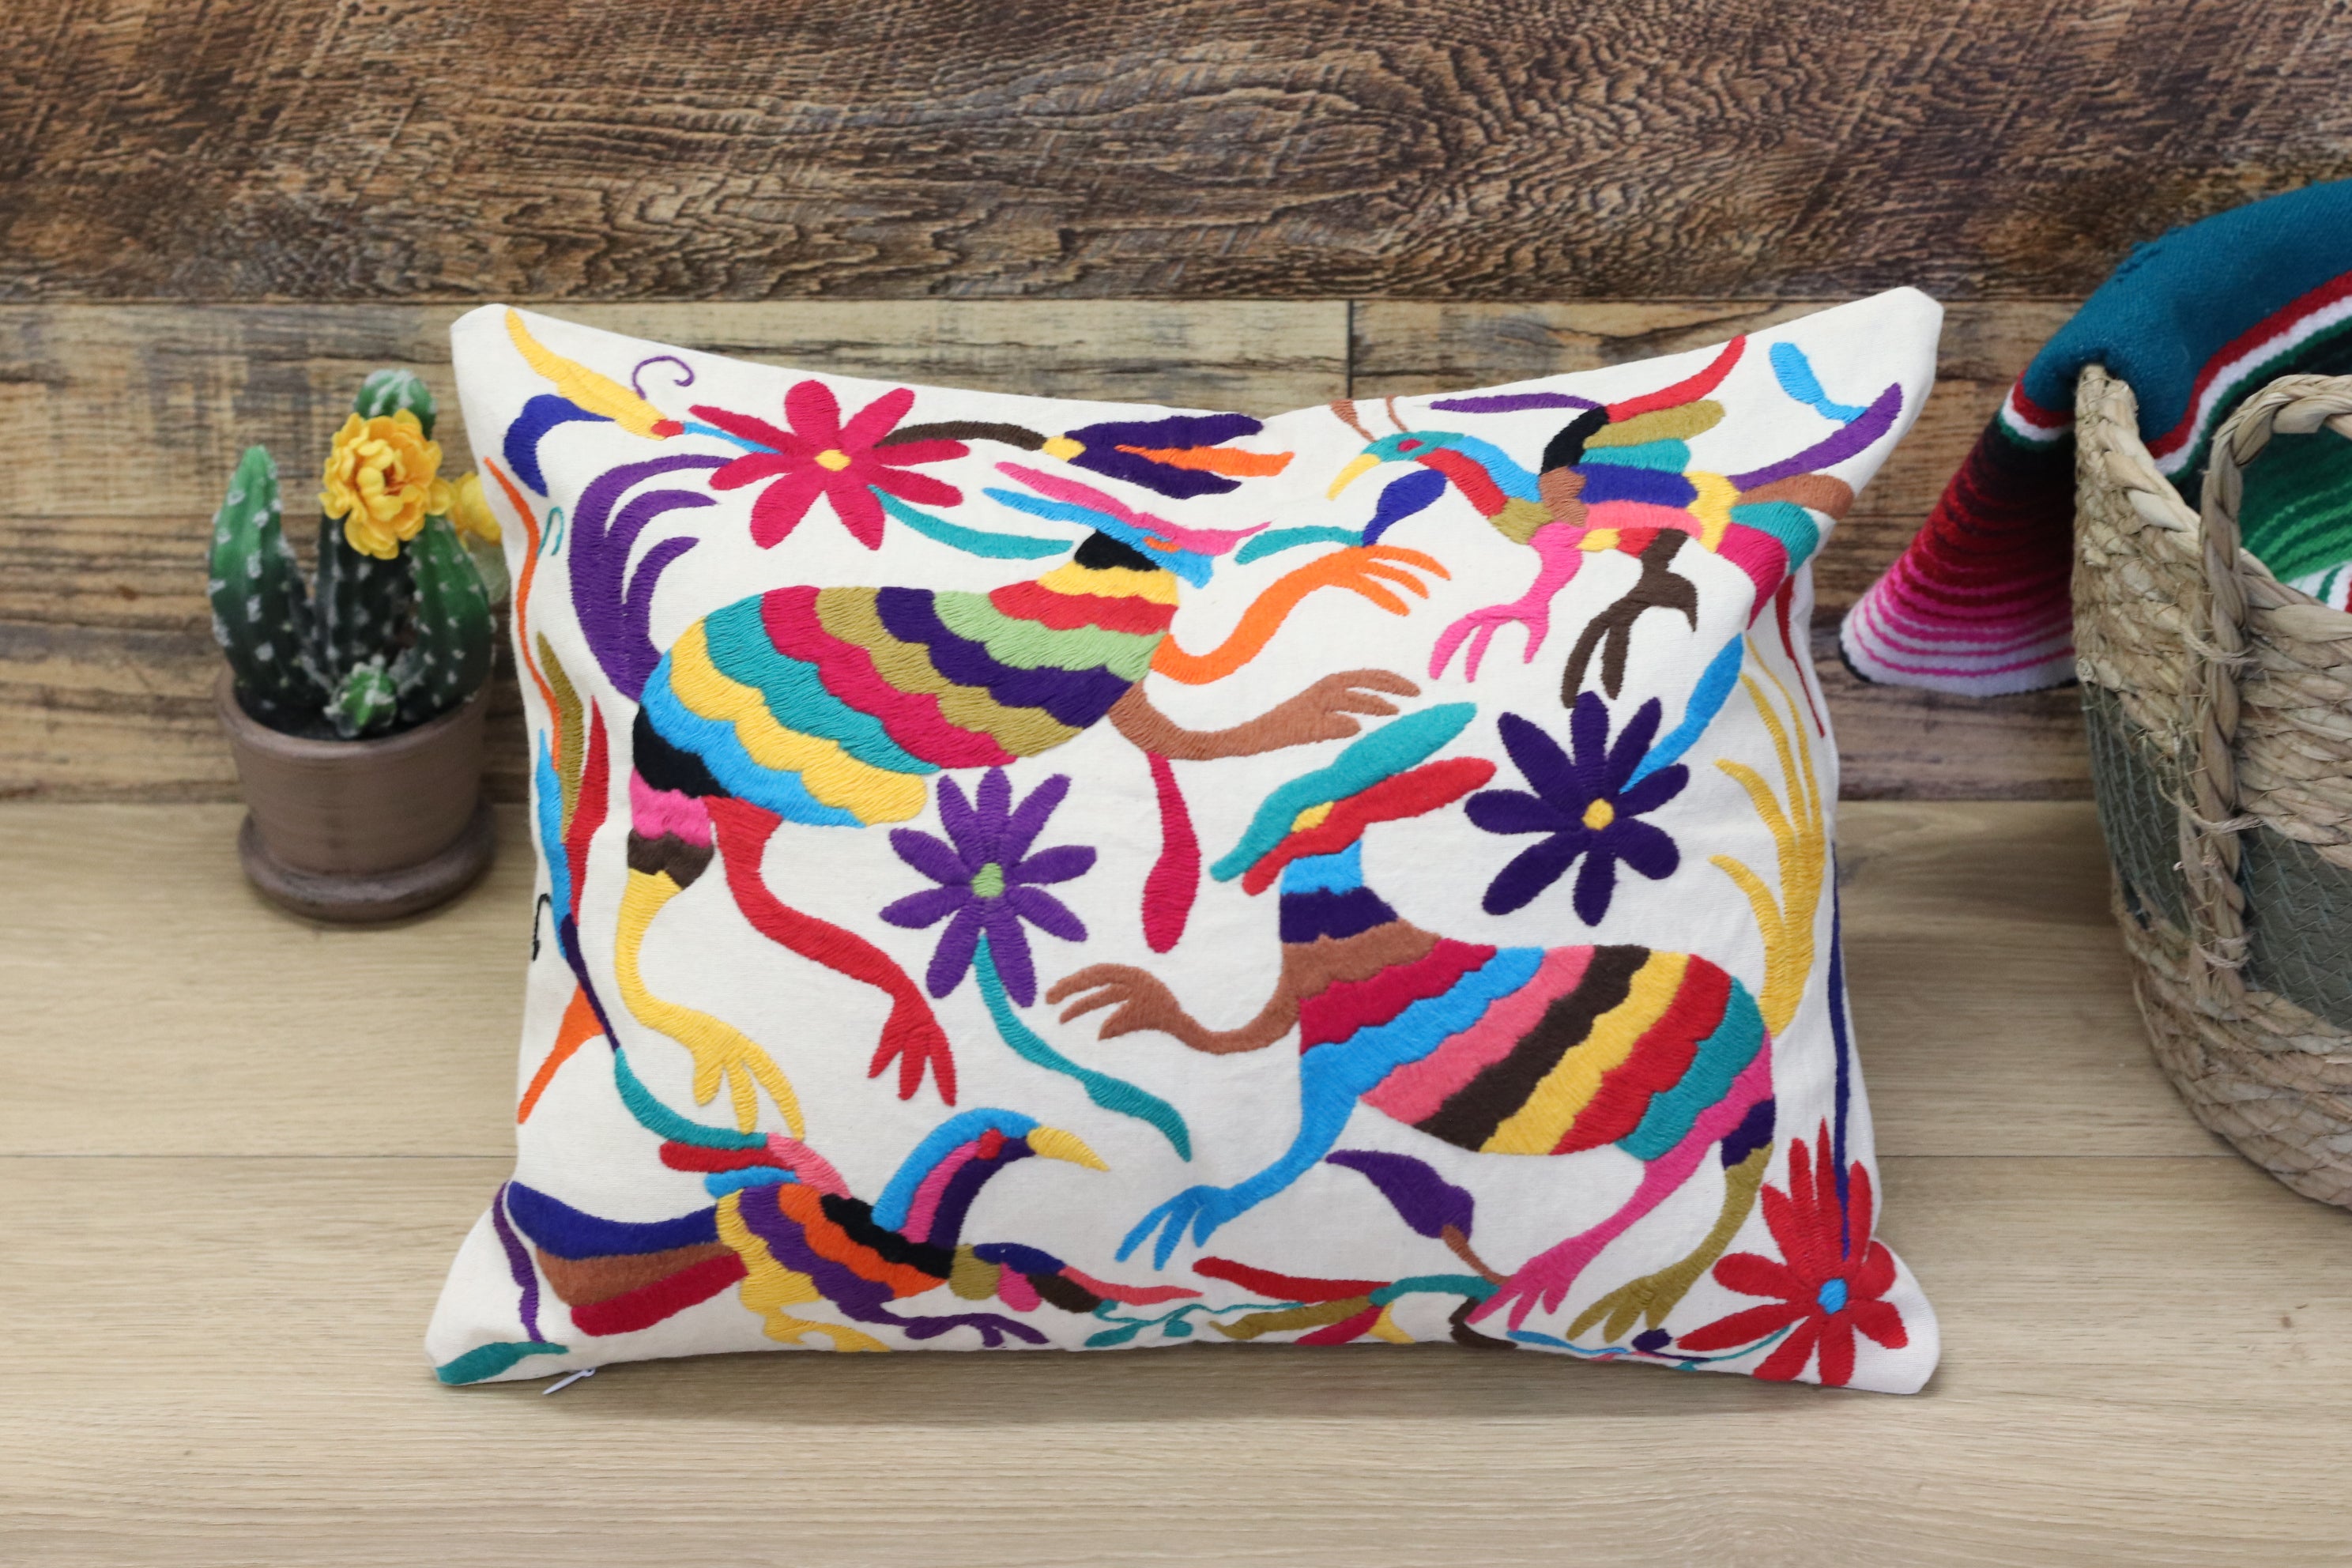 Otomi Tenango Pillow Cover, Throw Pillows, Mexican Hand Embroidered Textile Art. Flowers and Animals, Beige with Multicolor Thread. Handmade. Buy Now at www.felipeandgrace.com.